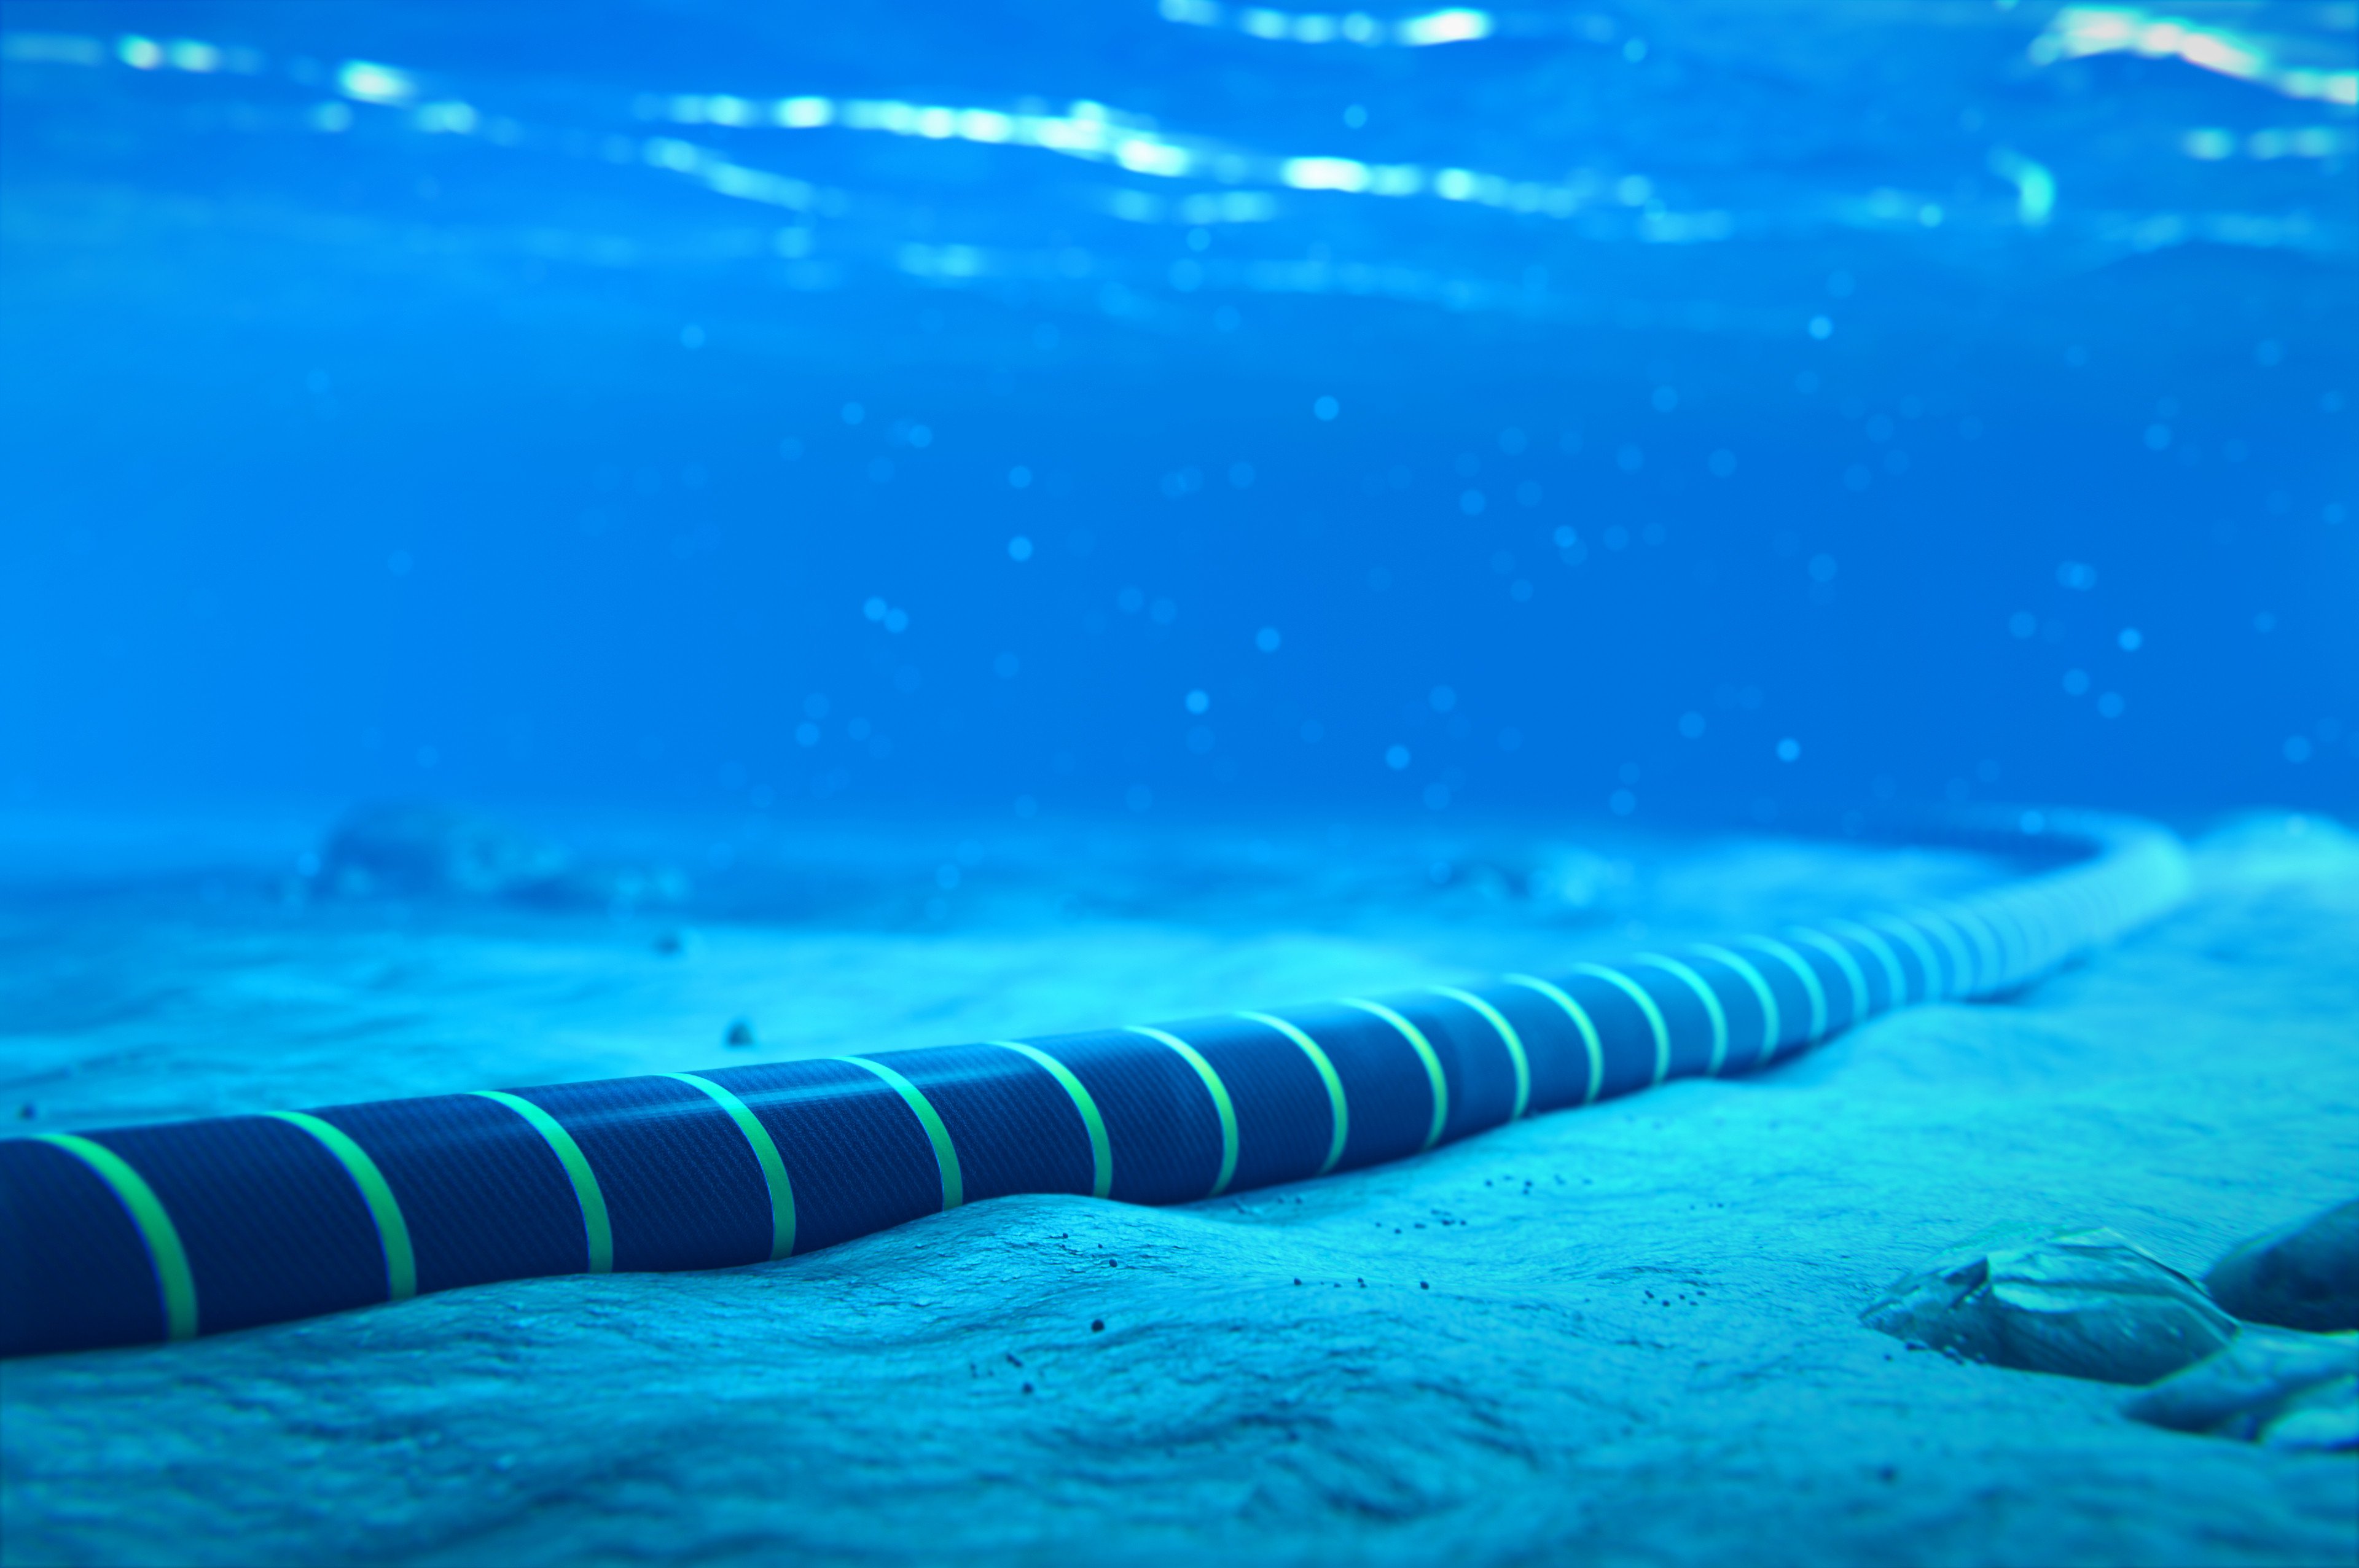 The US and China are battling to control the world’s undersea cables. Photo: Shutterstock